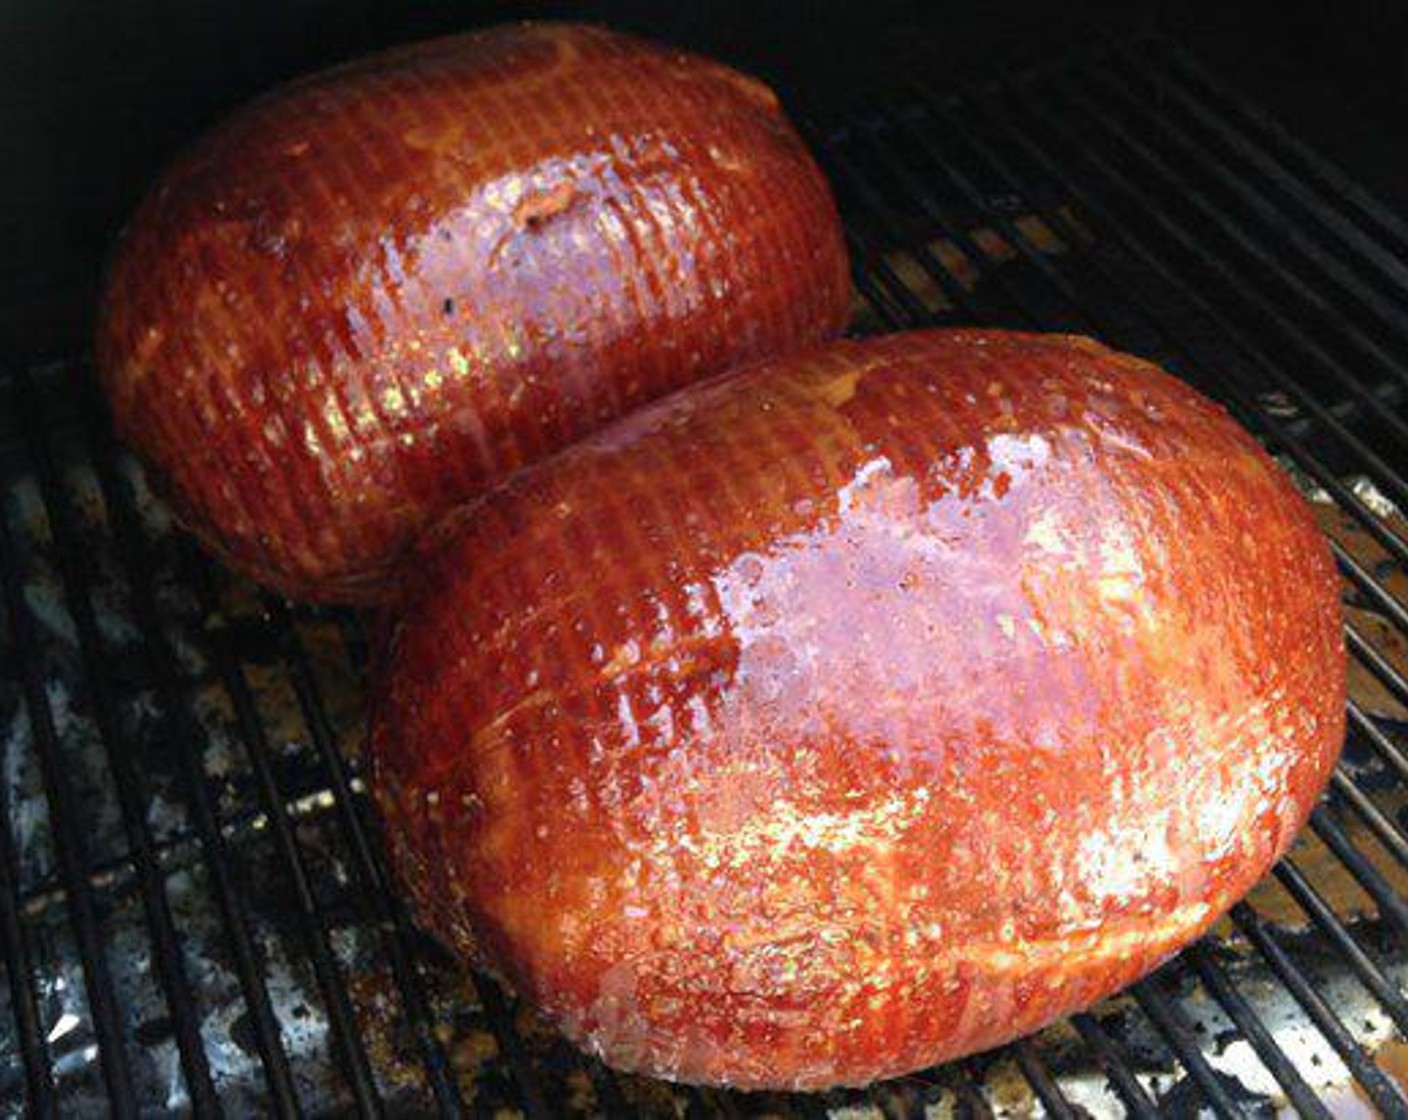 step 4 When the Pit Ham reaches 125-130 degrees F (51-54 degrees C) internally, it’s time to glaze. Squirt or brush the glaze over the top and sides of the Ham. The heat will melt the glaze and cause it to run all over the outside. The glaze needs to cook on for 30-45 minutes and at this point, the Pit Ham should be 140 degrees F (60 degrees C).